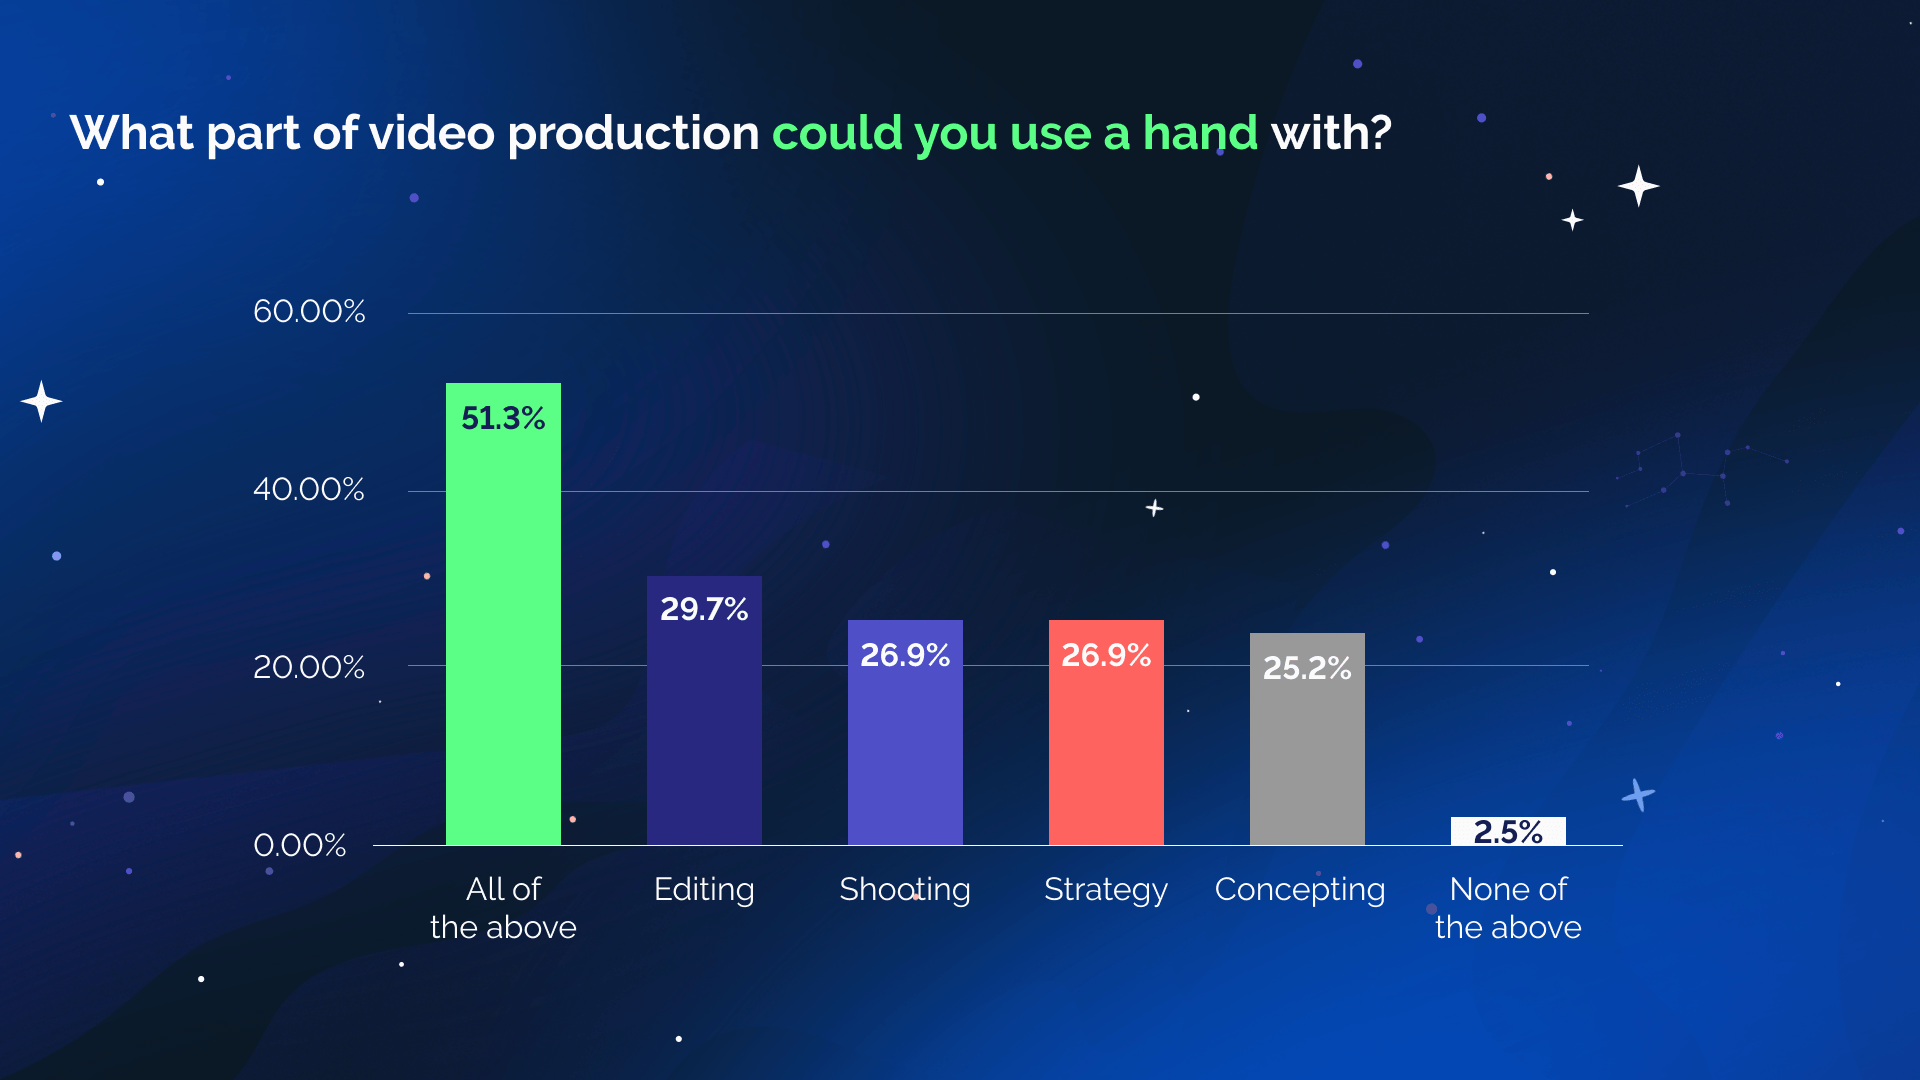 What part of video production could you use a hand with?